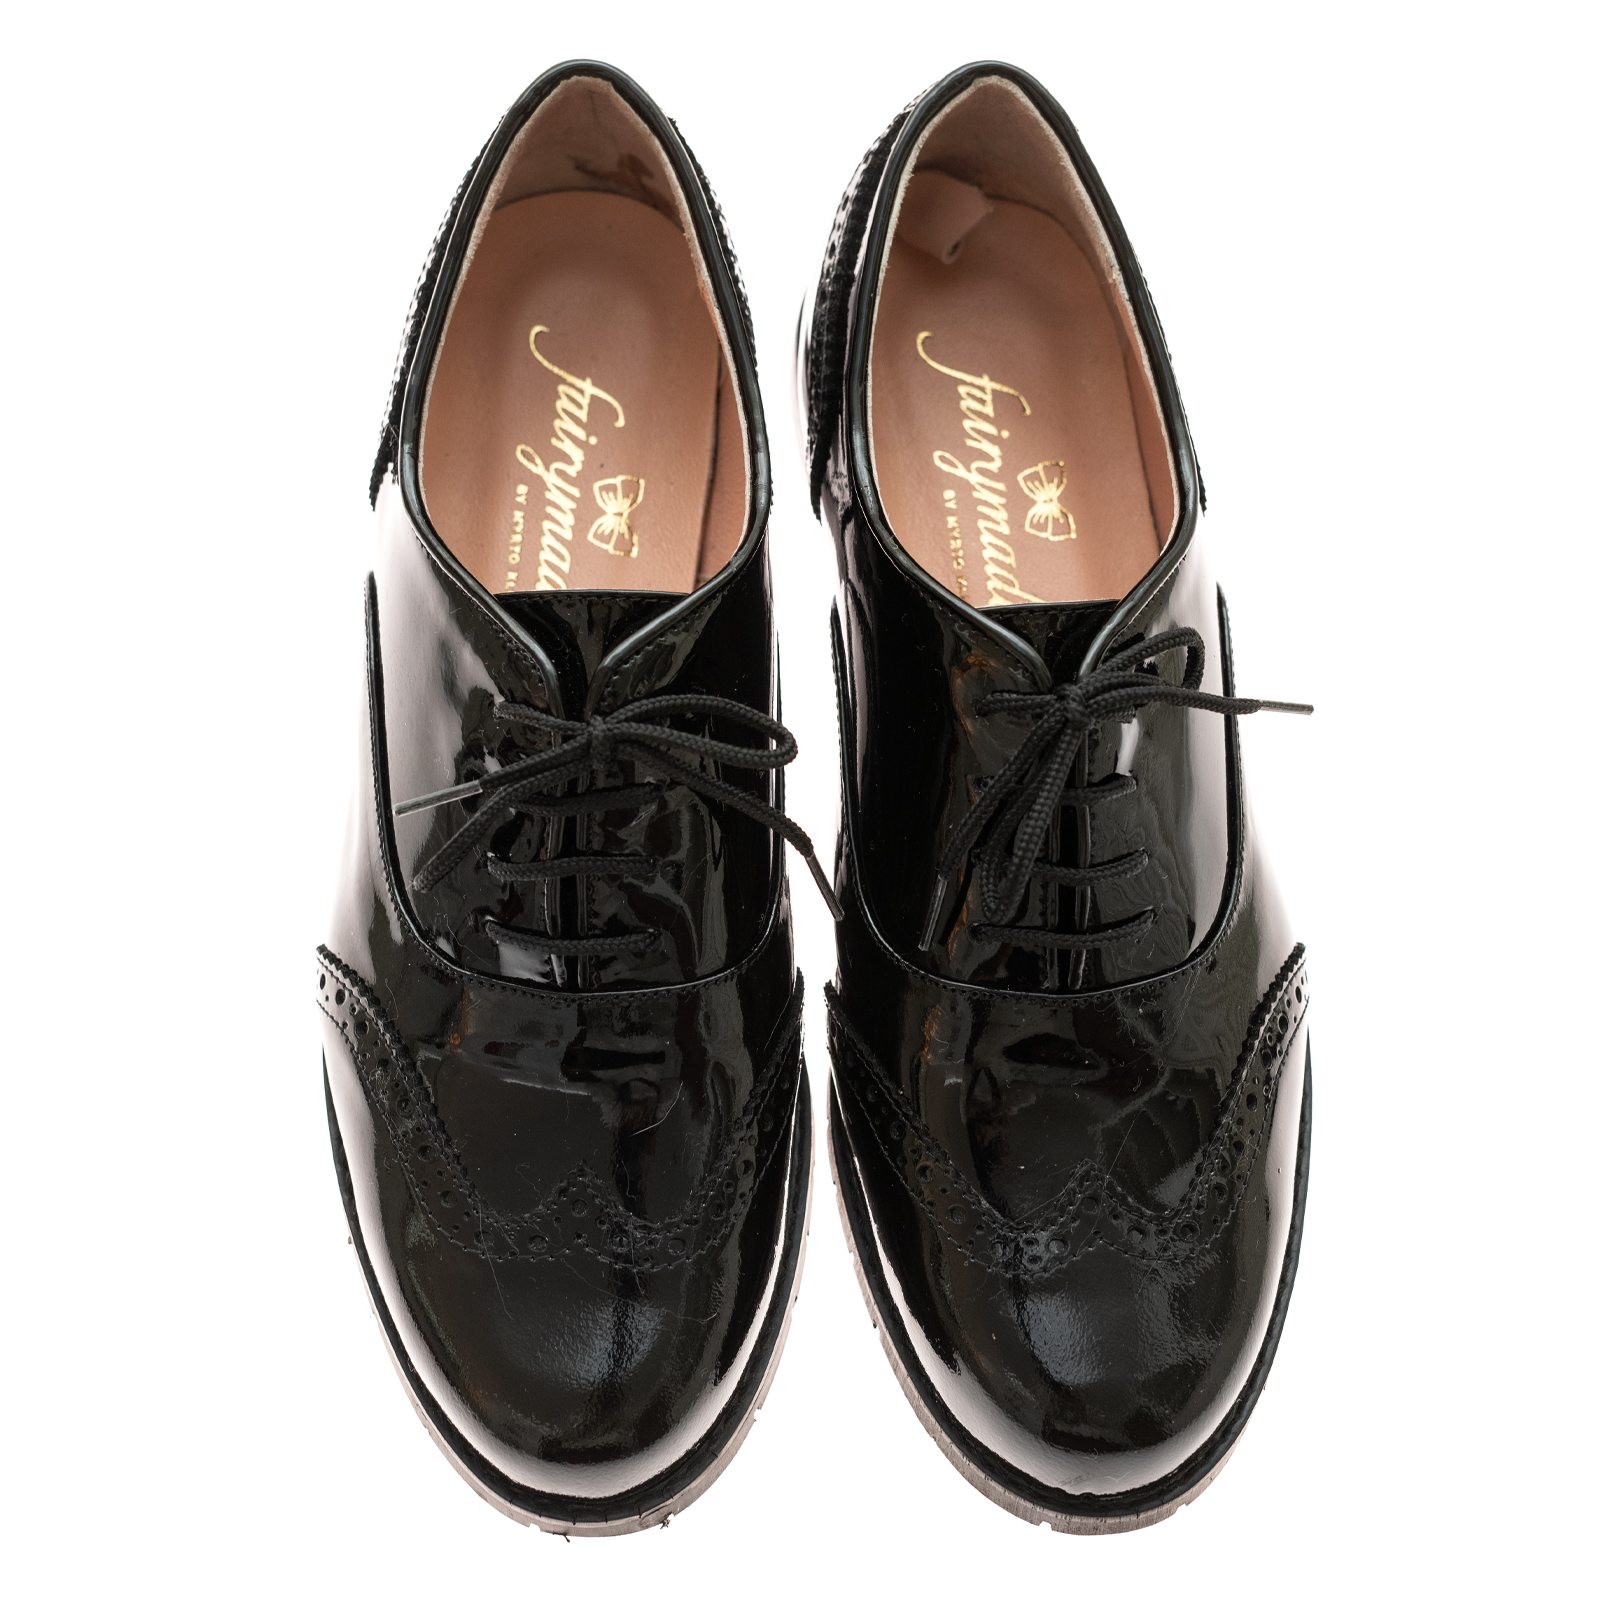 “Black Patent” Leather Brogues – Fairymade | Handcrafted by Myrto Kliafa